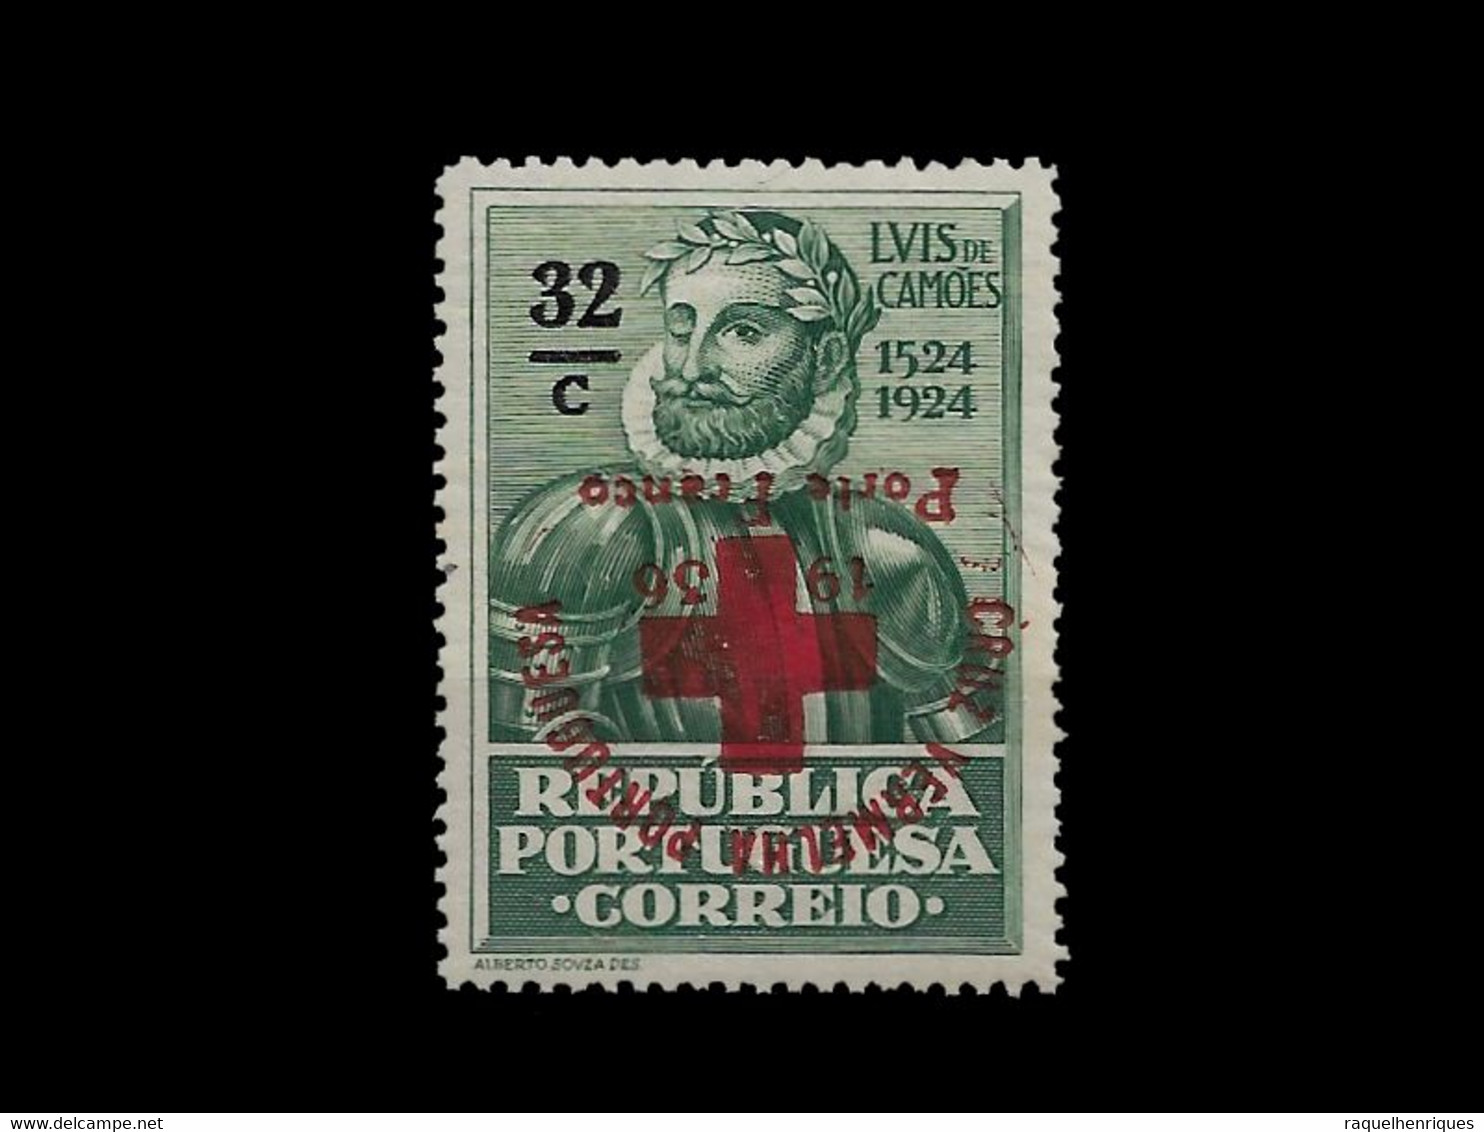 PORTUGAL PORTE FRANCO - 1936 ERROR UPSIDE DOWN SURCHARGED MNH (PLB#01-135) - Unused Stamps